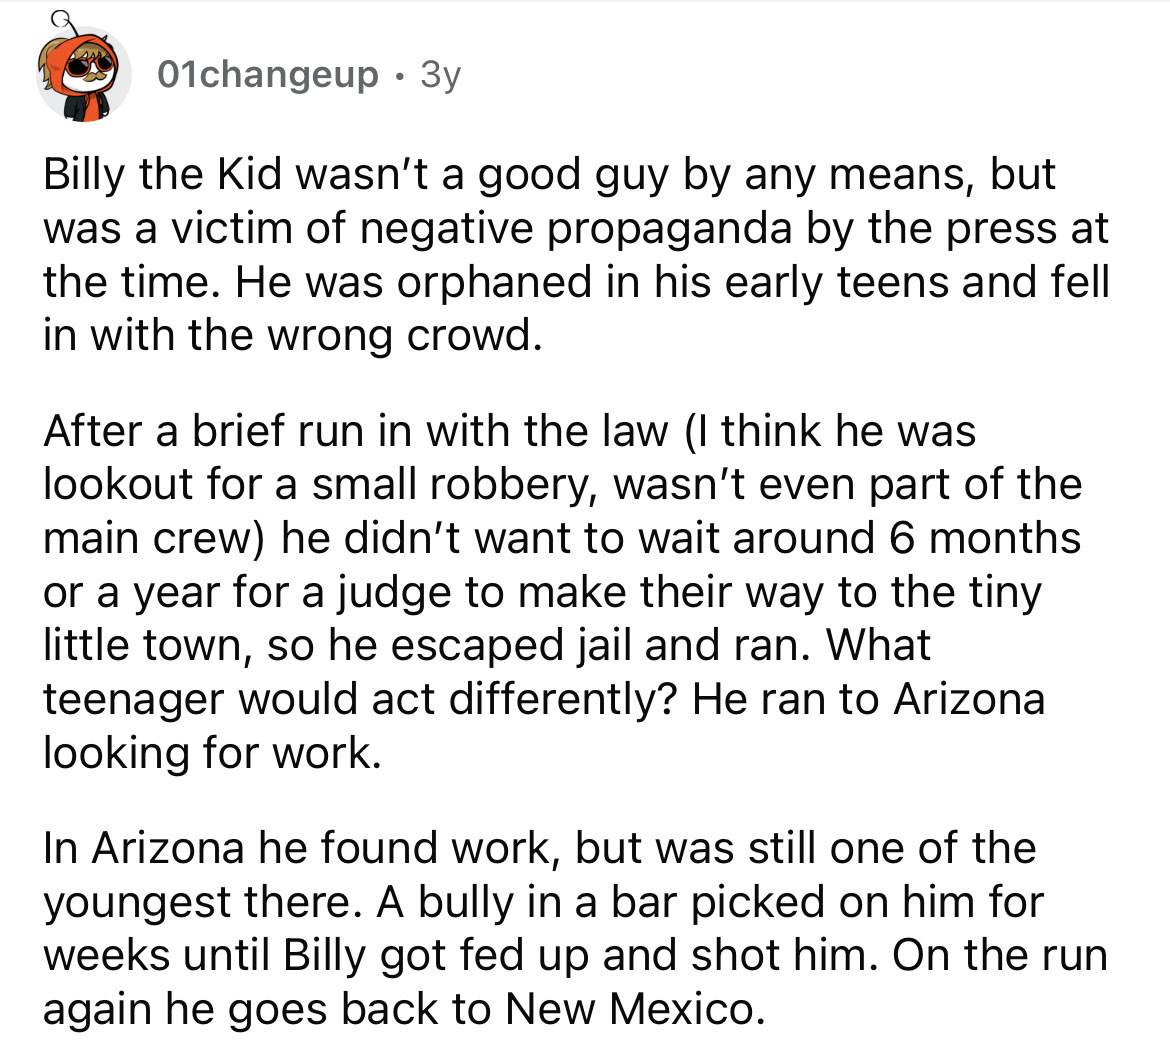 angle - 01changeup. 3y Billy the Kid wasn't a good guy by any means, but was a victim of negative propaganda by the press at the time. He was orphaned in his early teens and fell in with the wrong crowd. After a brief run in with the law I think he was lo